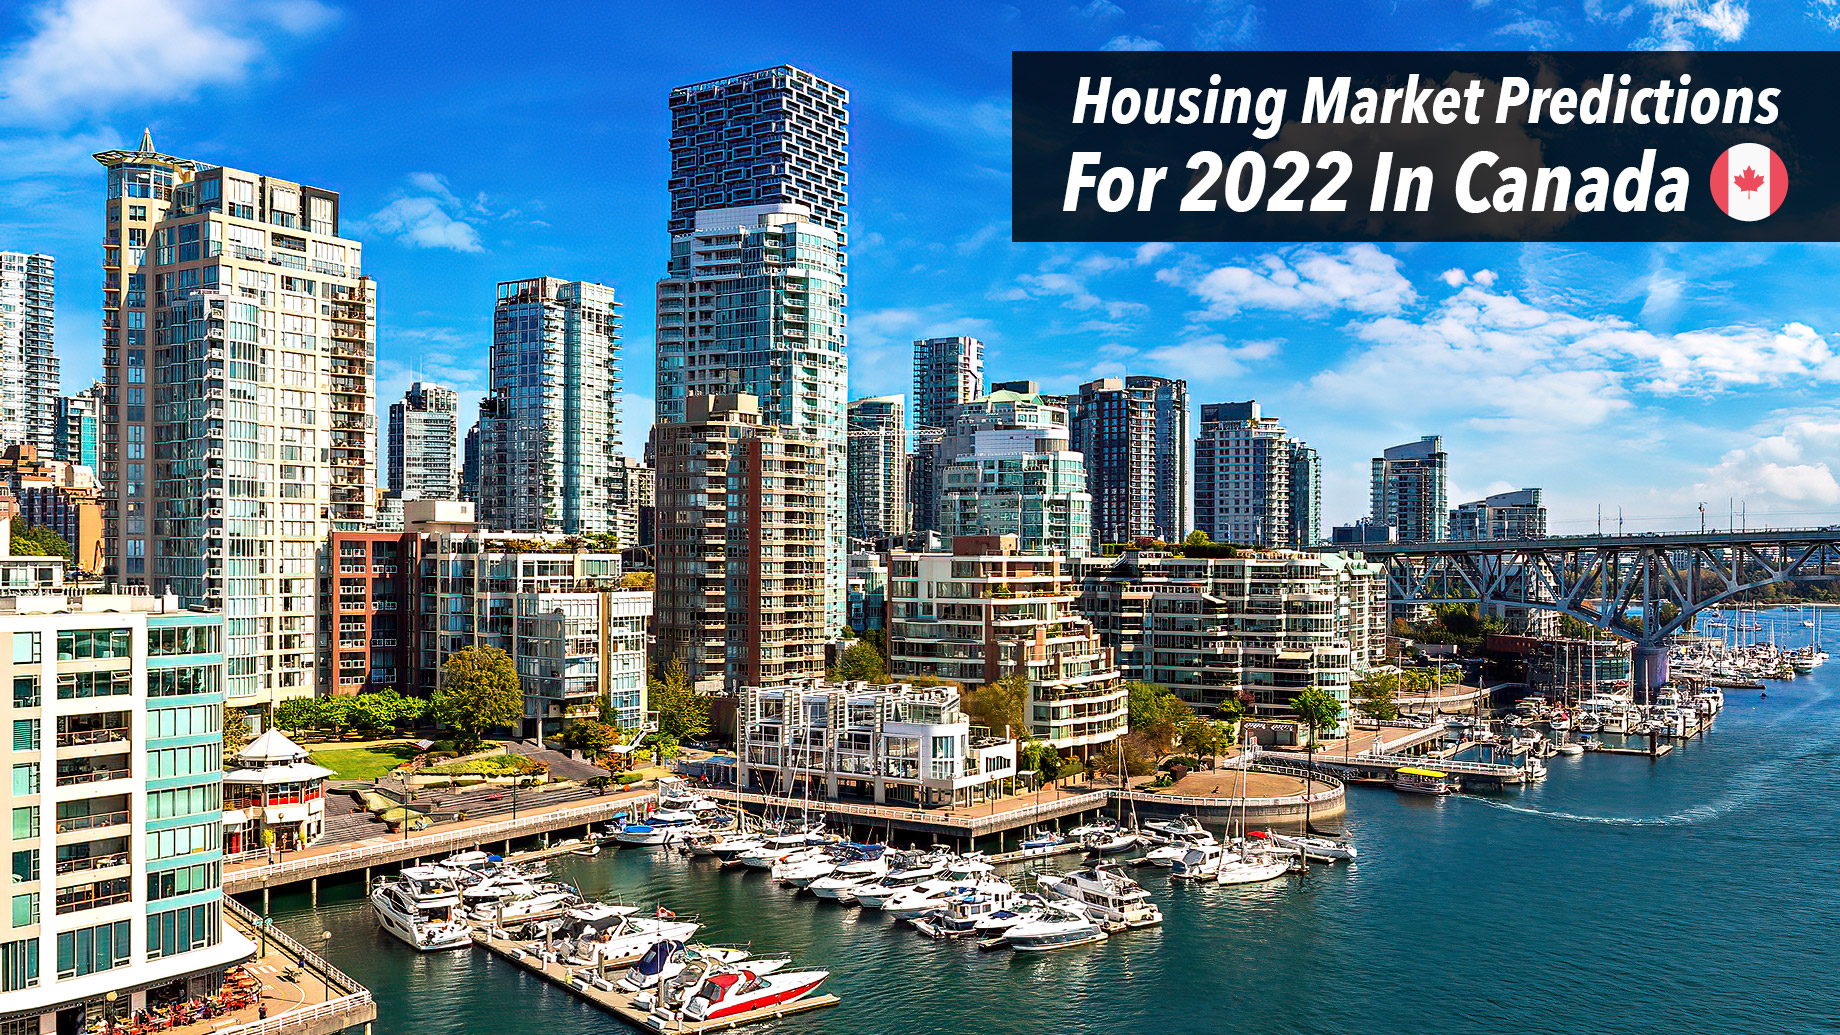 Housing Market Predictions For 2022 In Canada